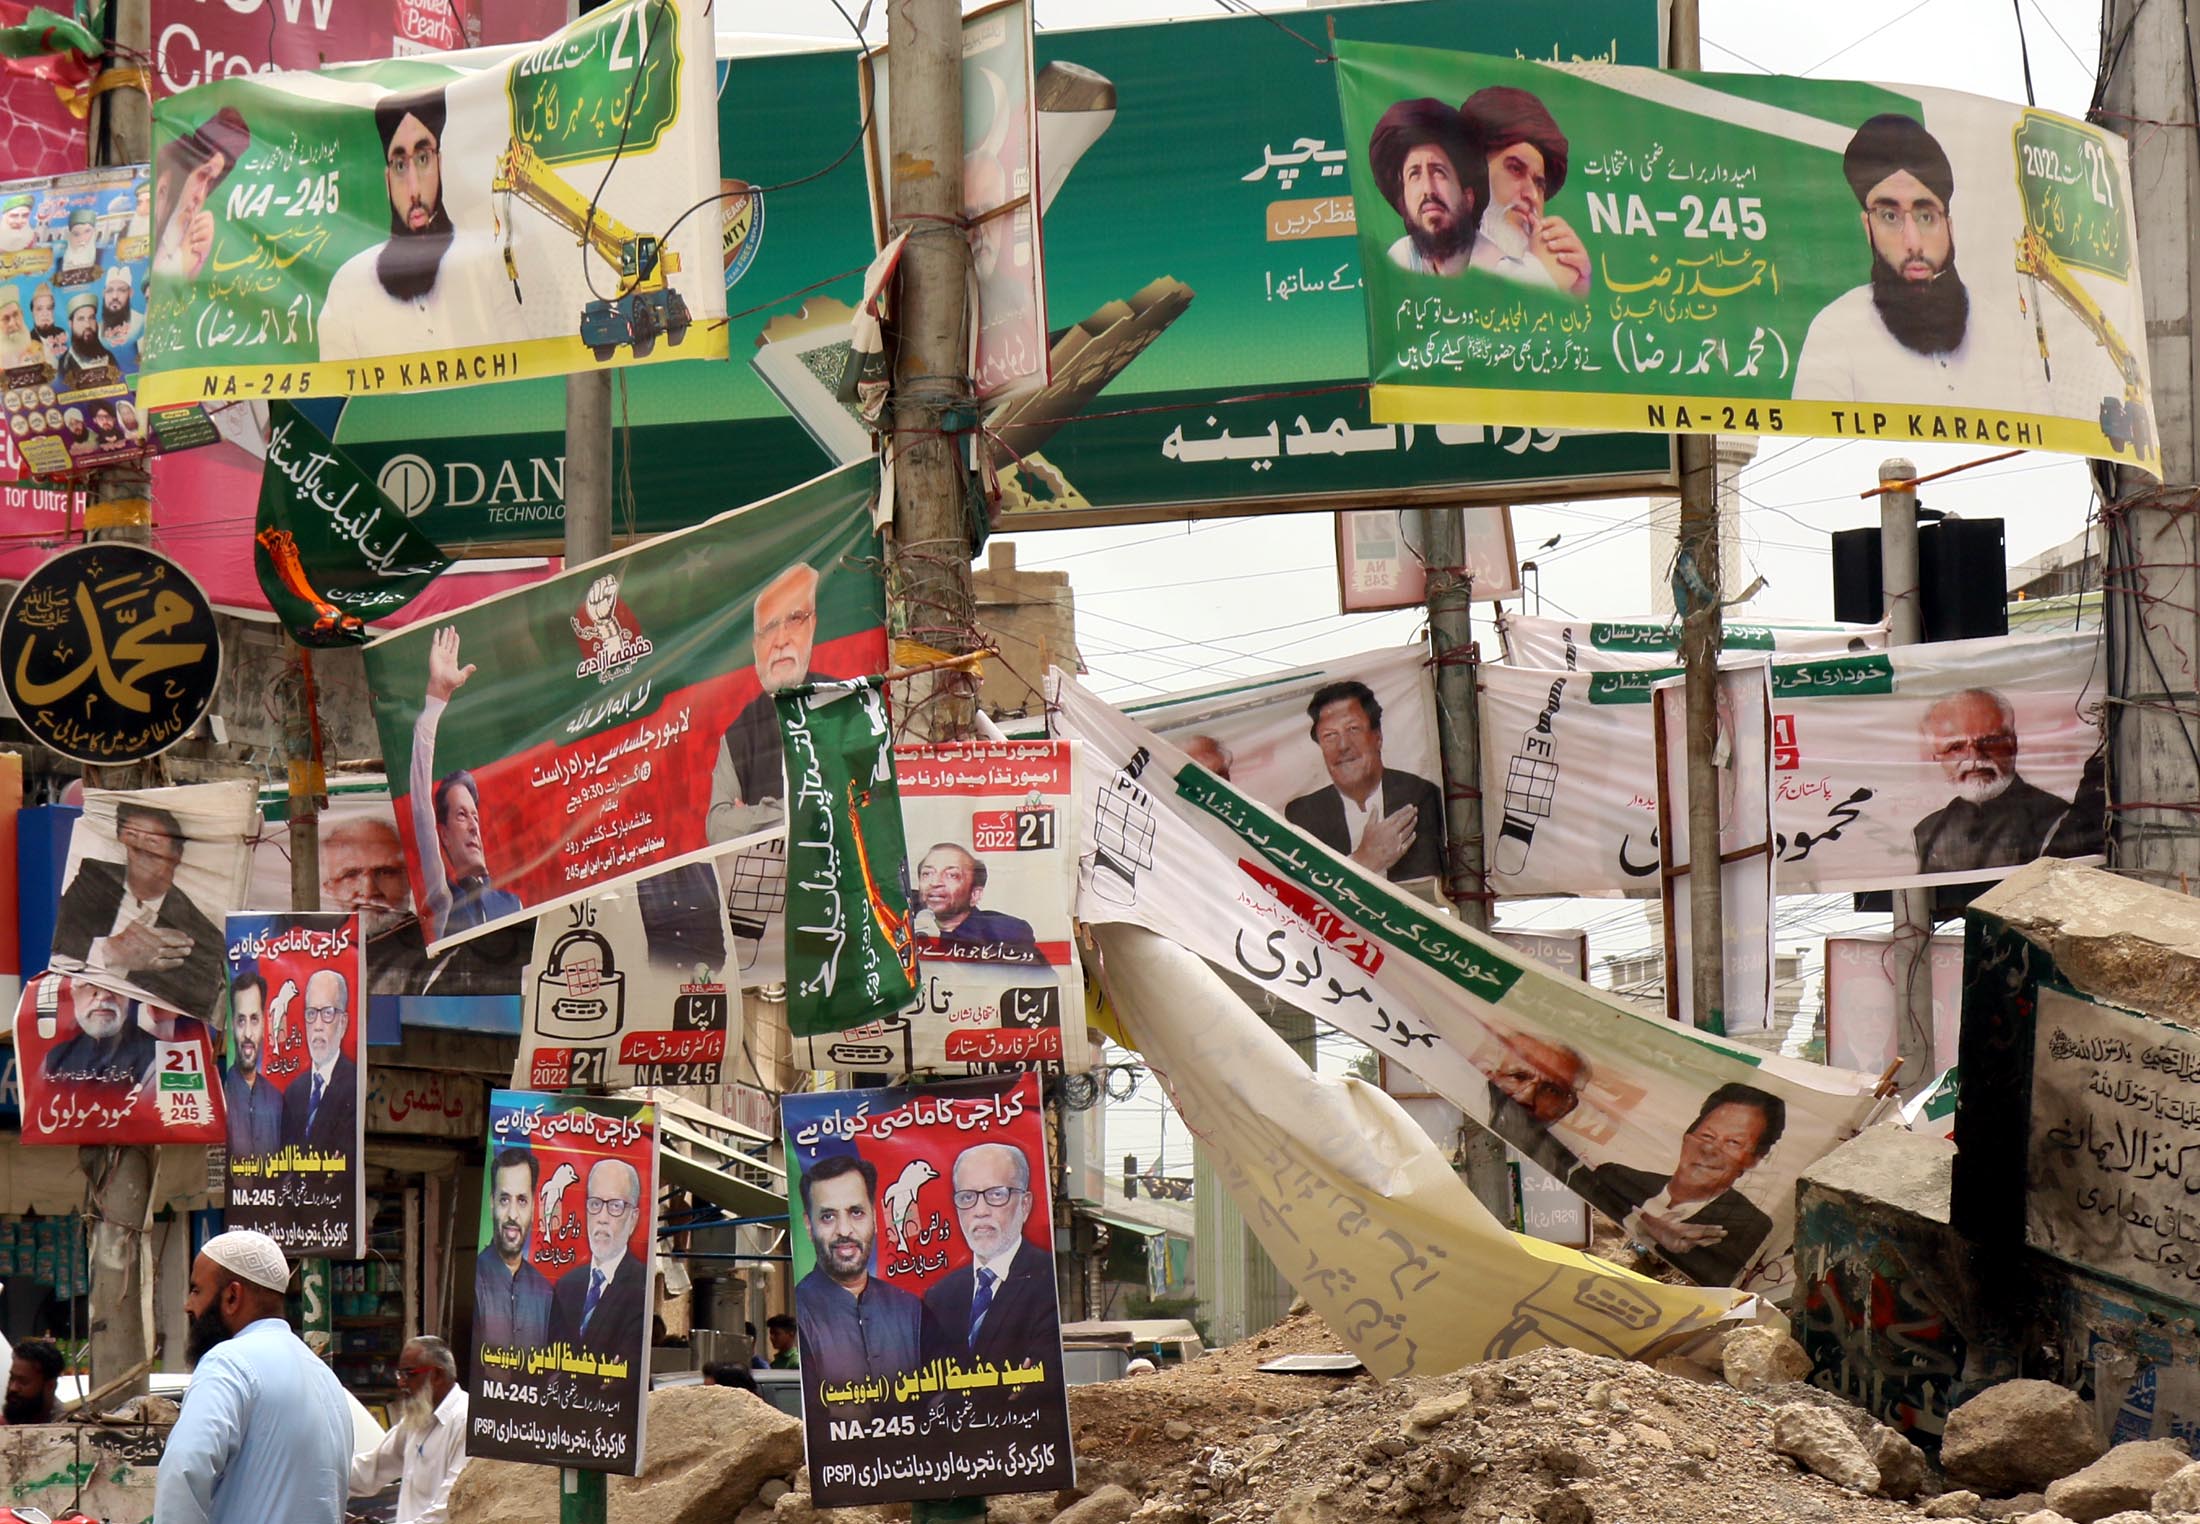 Election banners above a dug-up sewerage line in NA-245